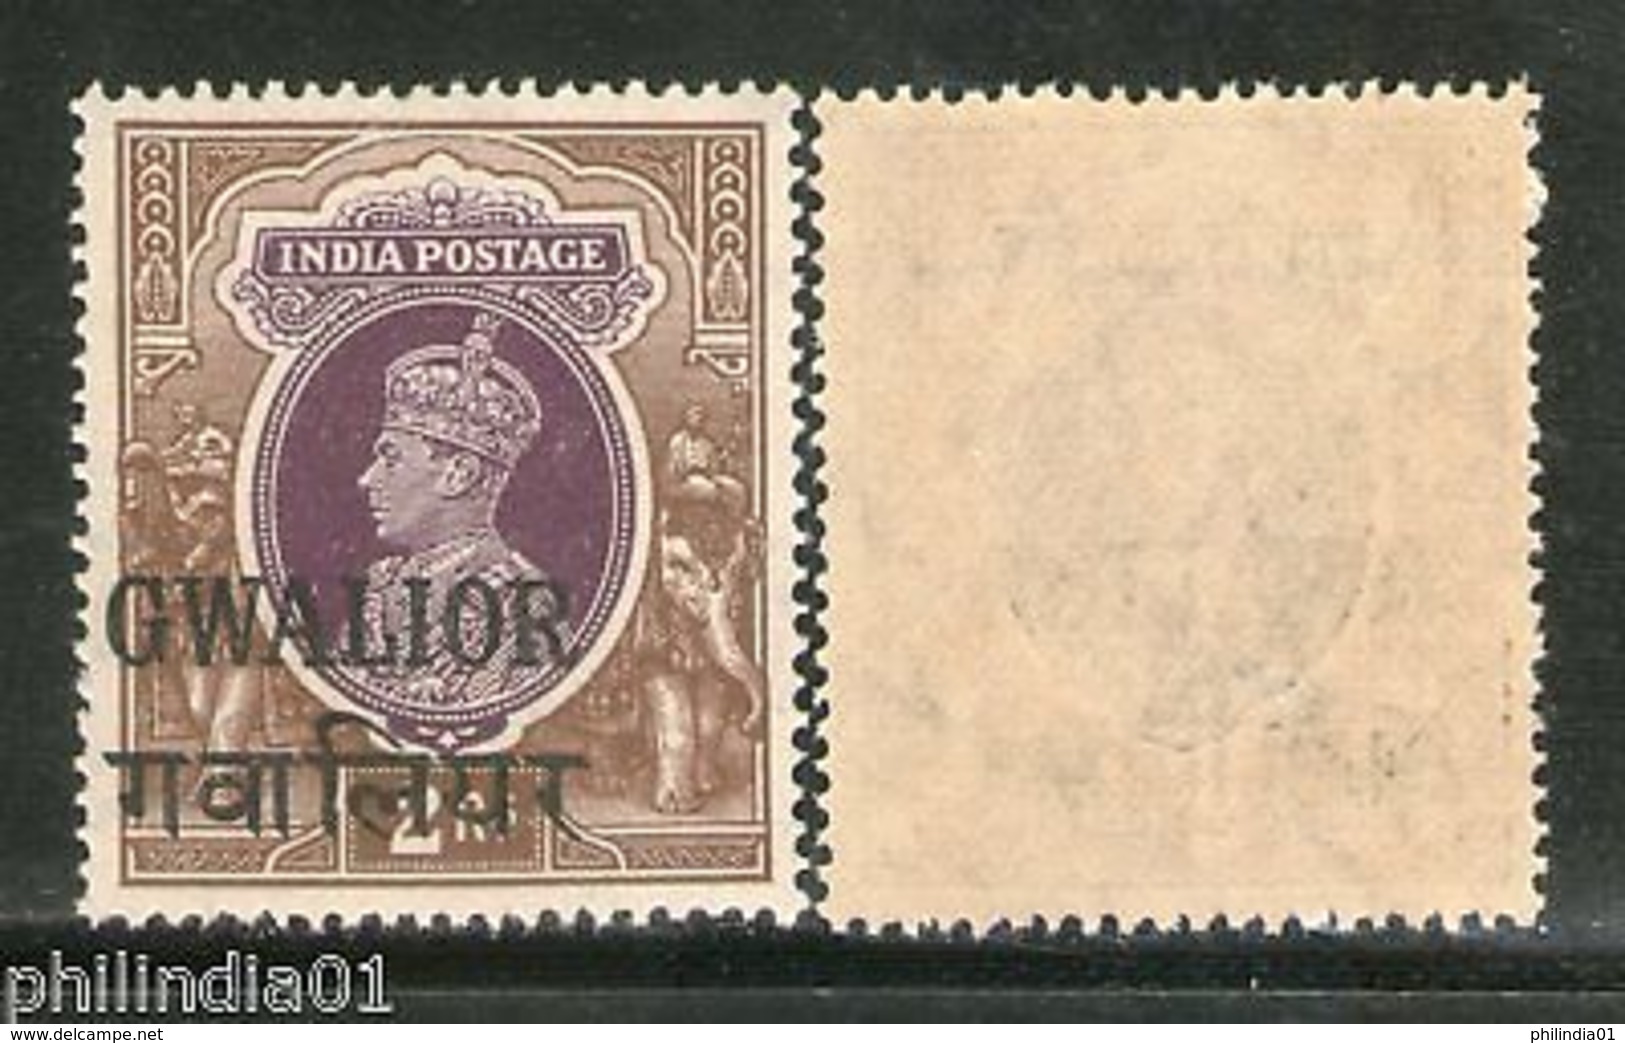 India Gwalior State 2 Rs KG VI Postage Stamp SG 113 / Sc 113 Cat $63 MNH - Gwalior